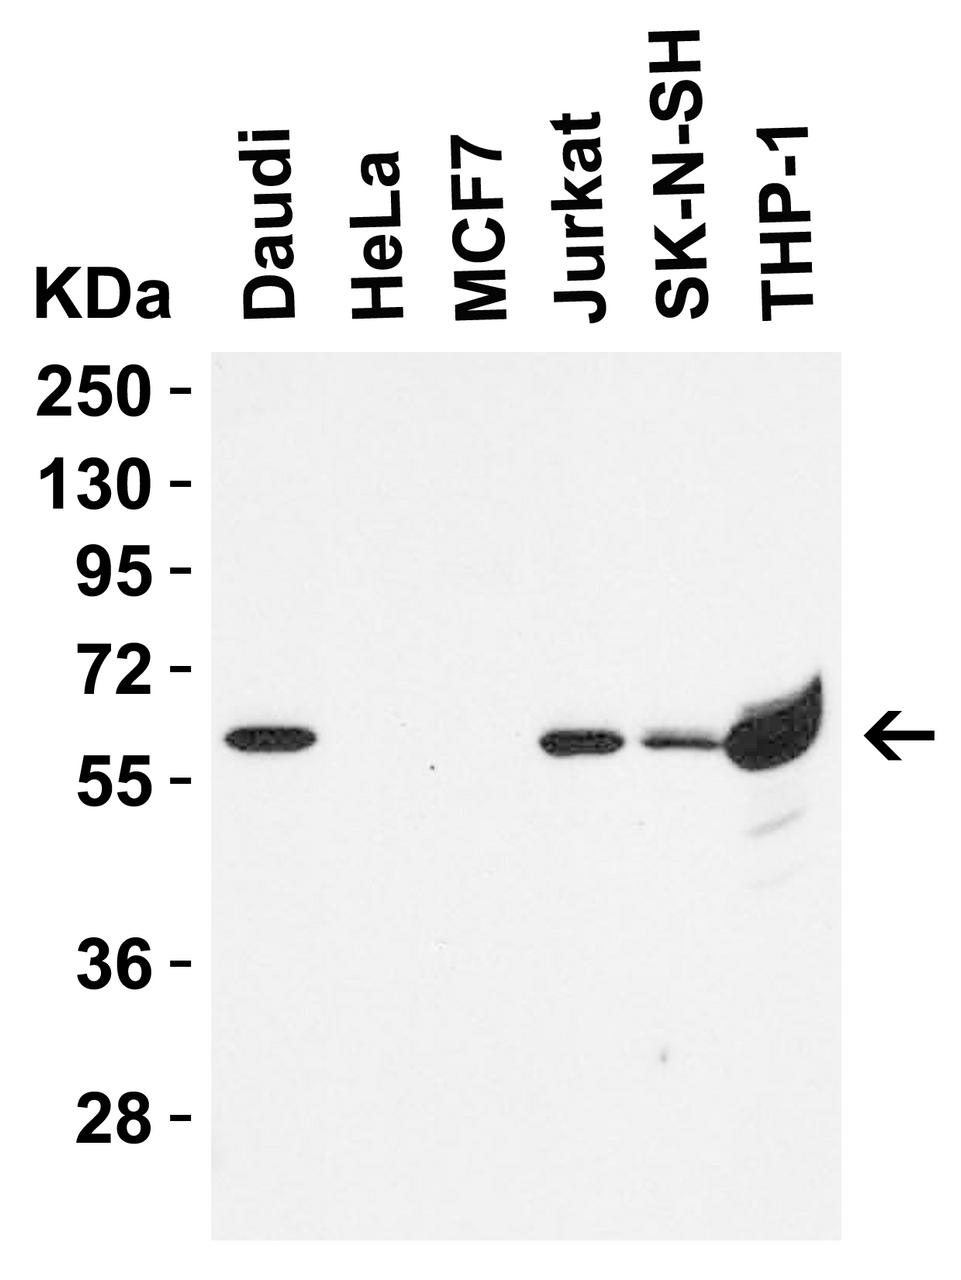 Figure 1 Western Blot Validation in Human Cell Lines
Loading: 15 &#956;g of lysates per lane.
Antibodies: hRIP3, 8963 (0.5 &#956;g/mL) , 1h incubation at RT in 5% NFDM/TBST.
Secondary: Goat anti-rabbit IgG HRP conjugate at 1:10000 dilution.